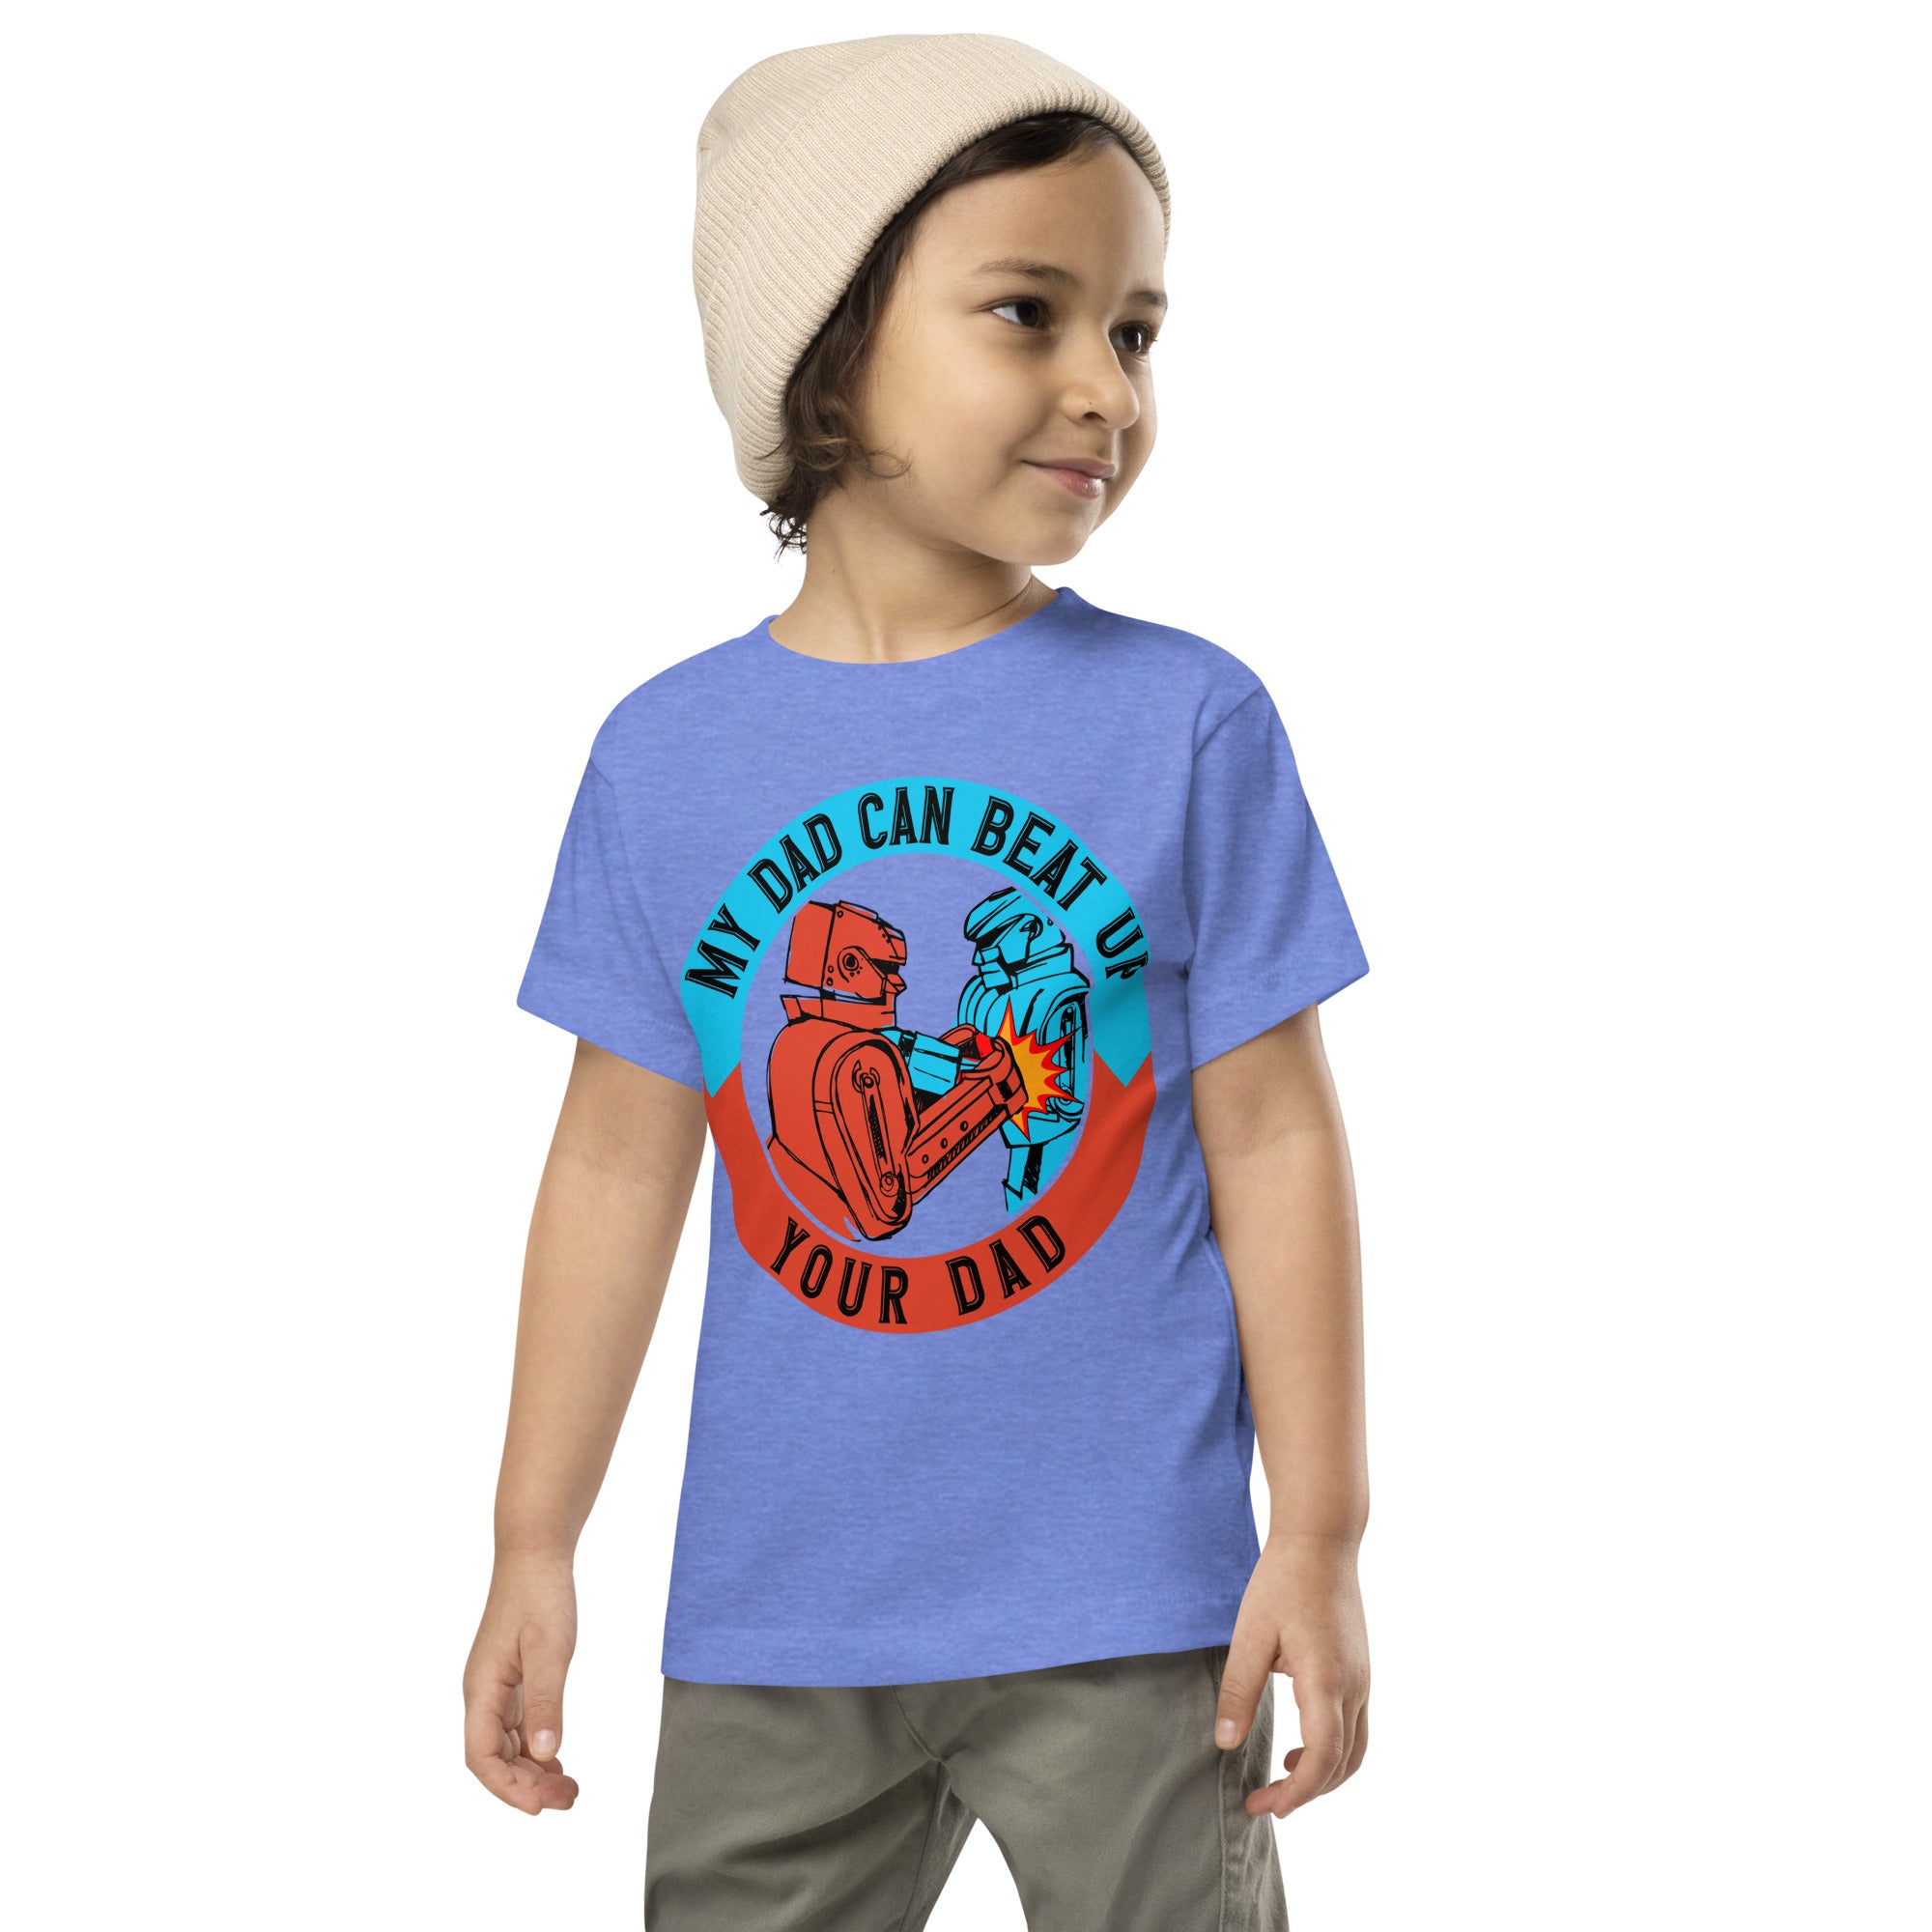 My Dad Can Beat Up Your Dad - Toddler Short Sleeve Tee